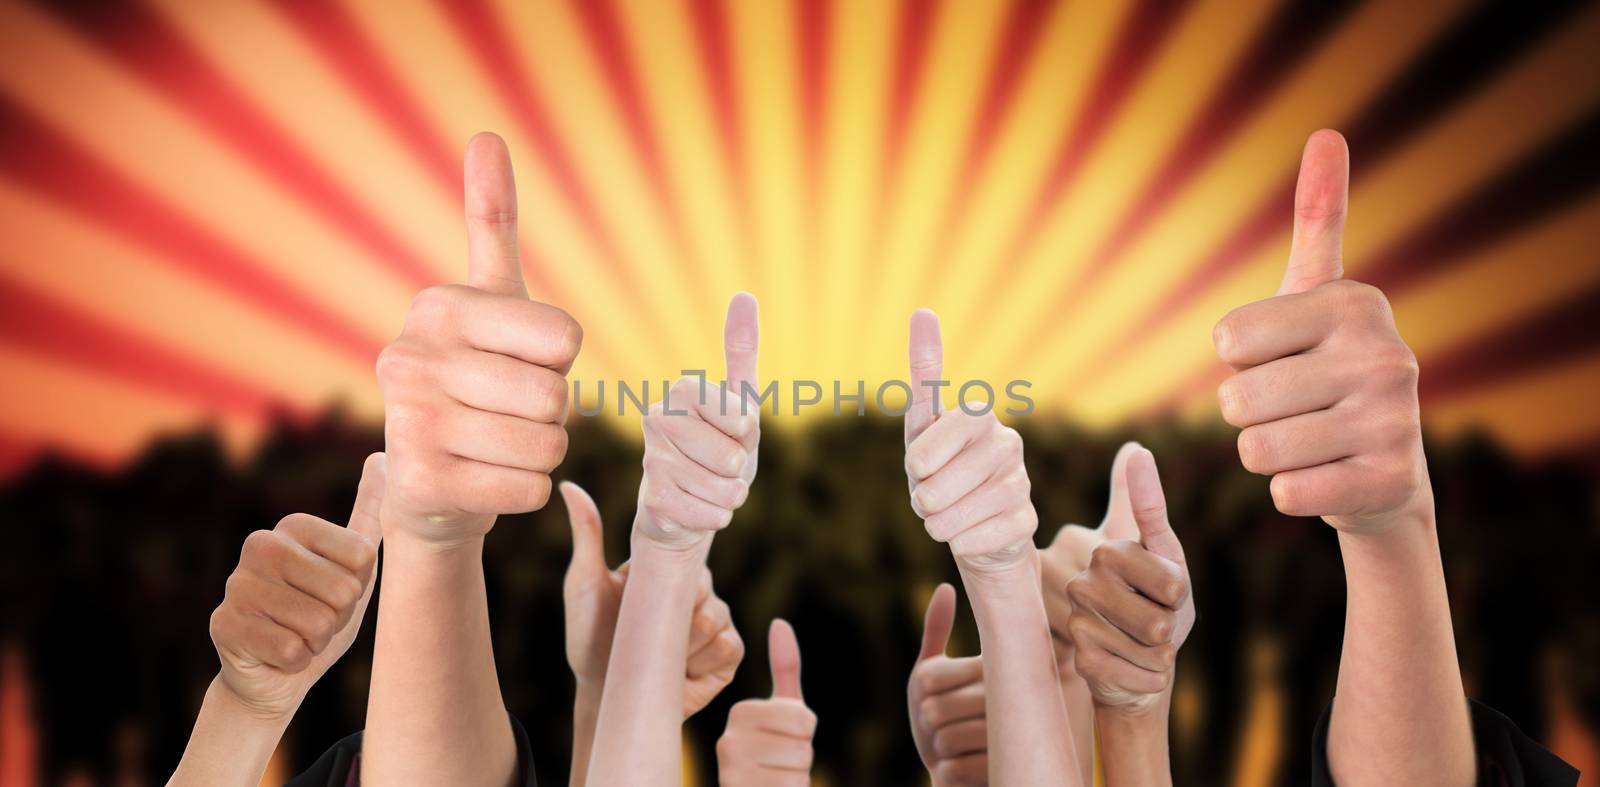 Hands showing thumbs up against digitally generated nightclub with people dancing